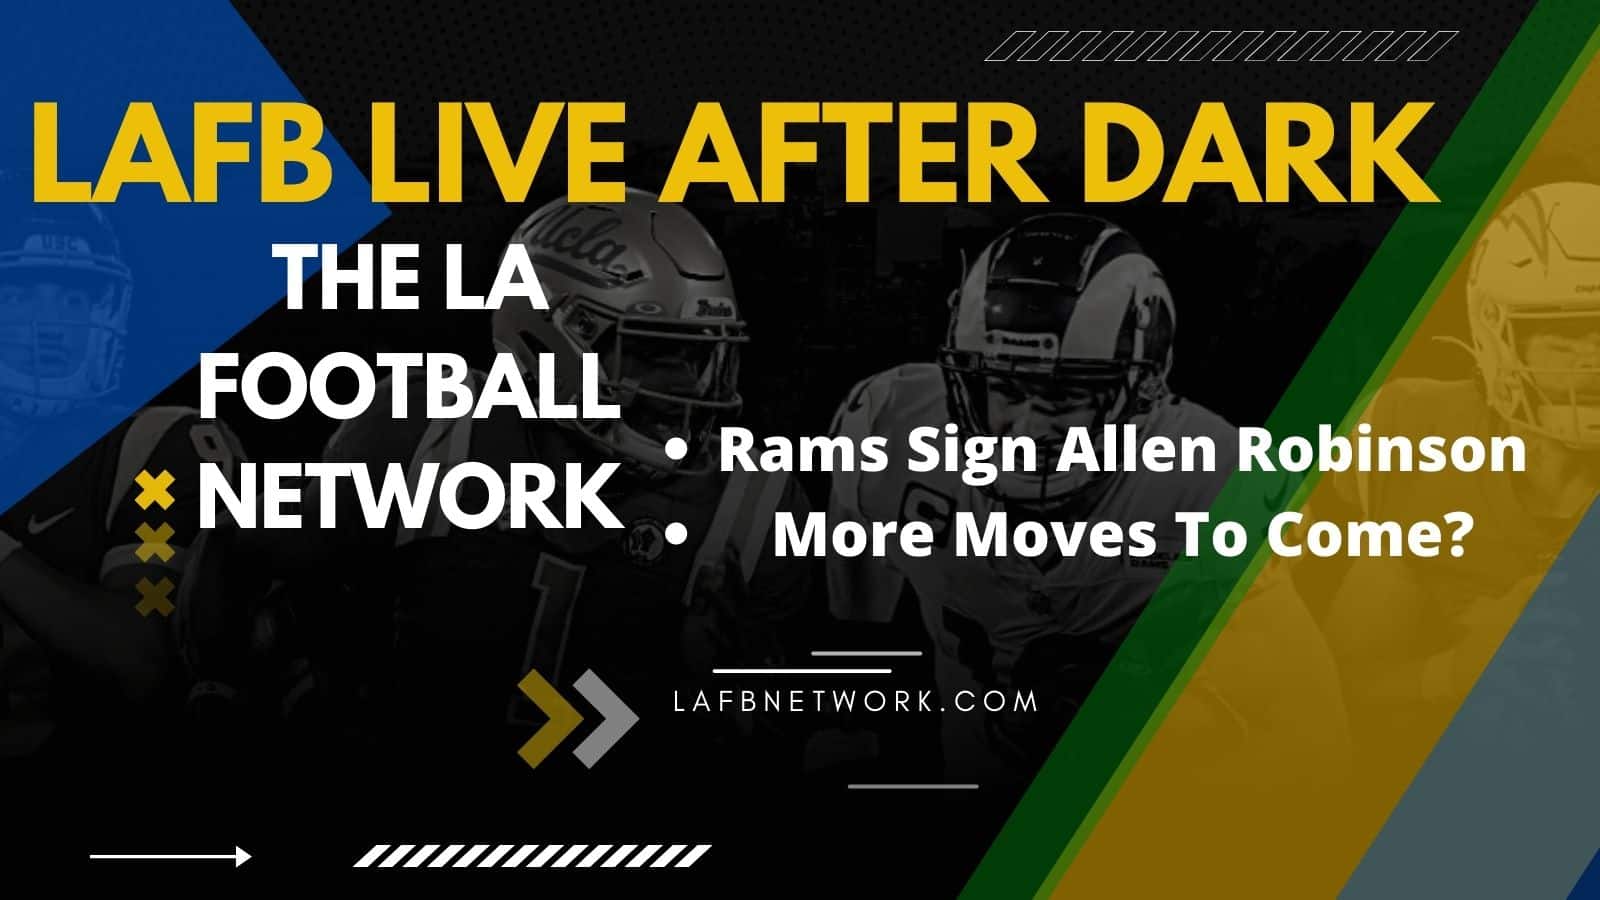 LAFB Live After Dark: Does Allen Robinson Signing Signify More Moves To Come For The Rams?